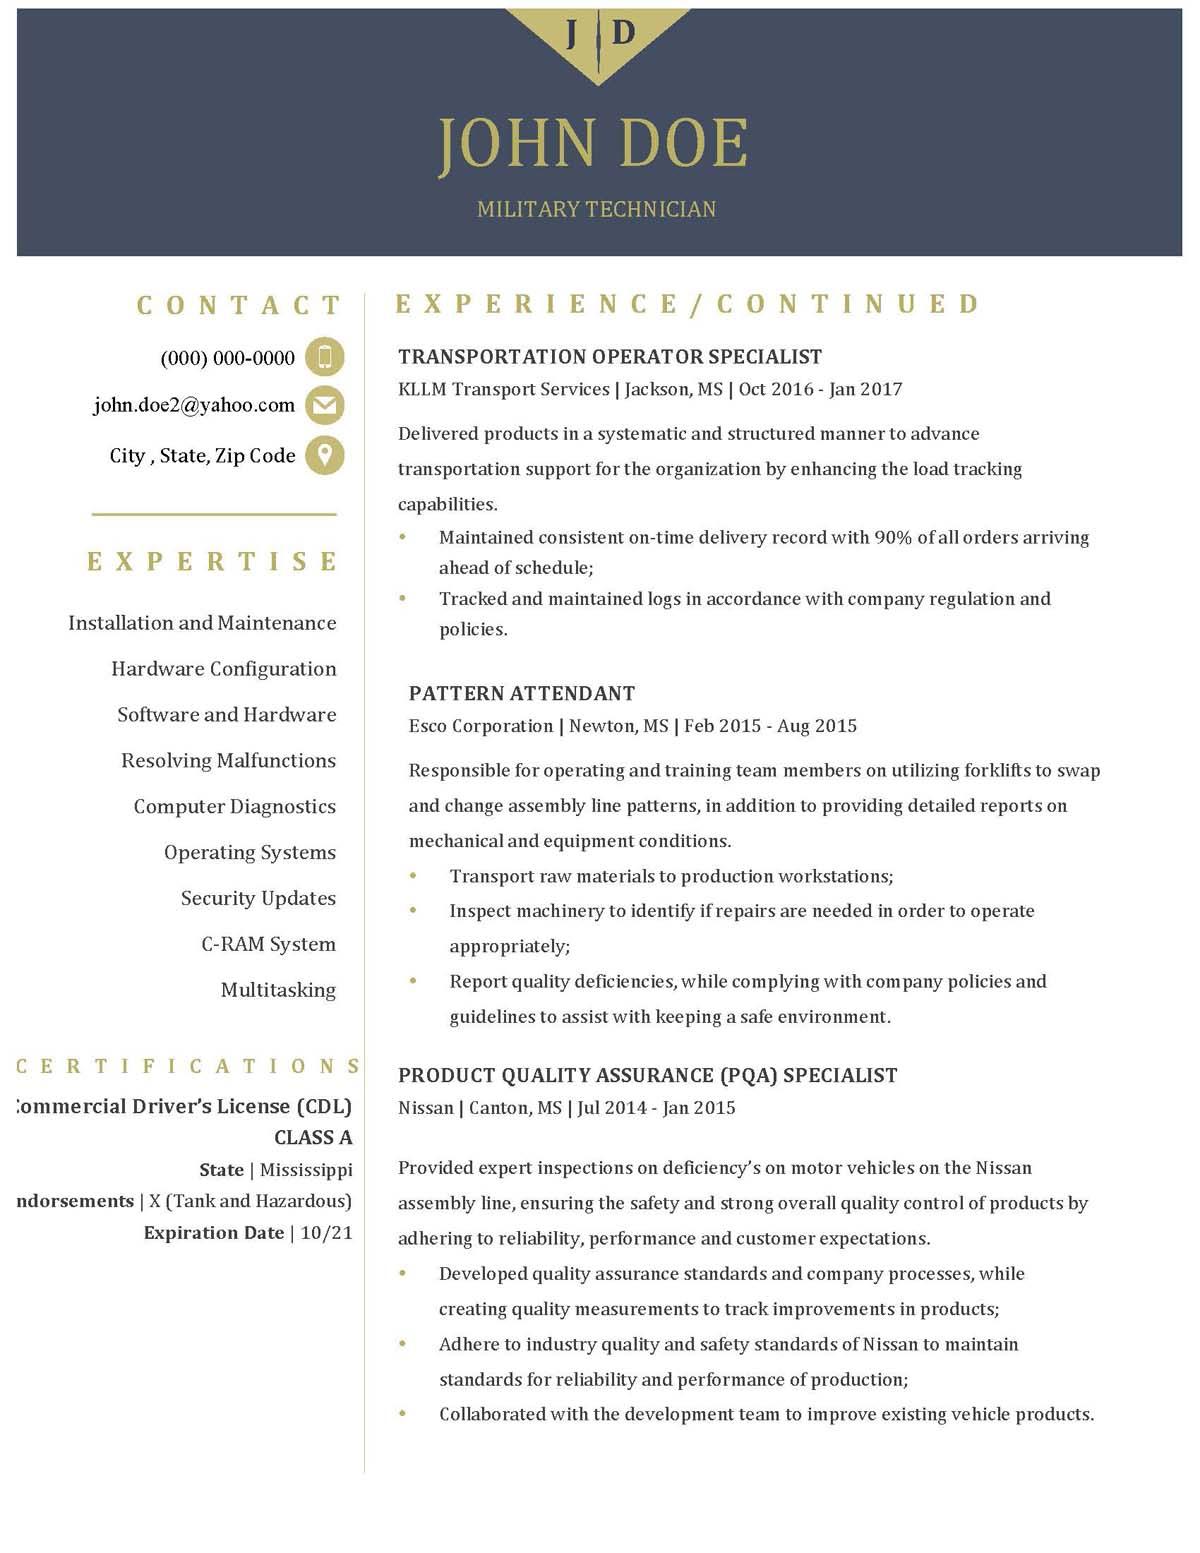 Sample resume: Military Services, High Experience, Chronological